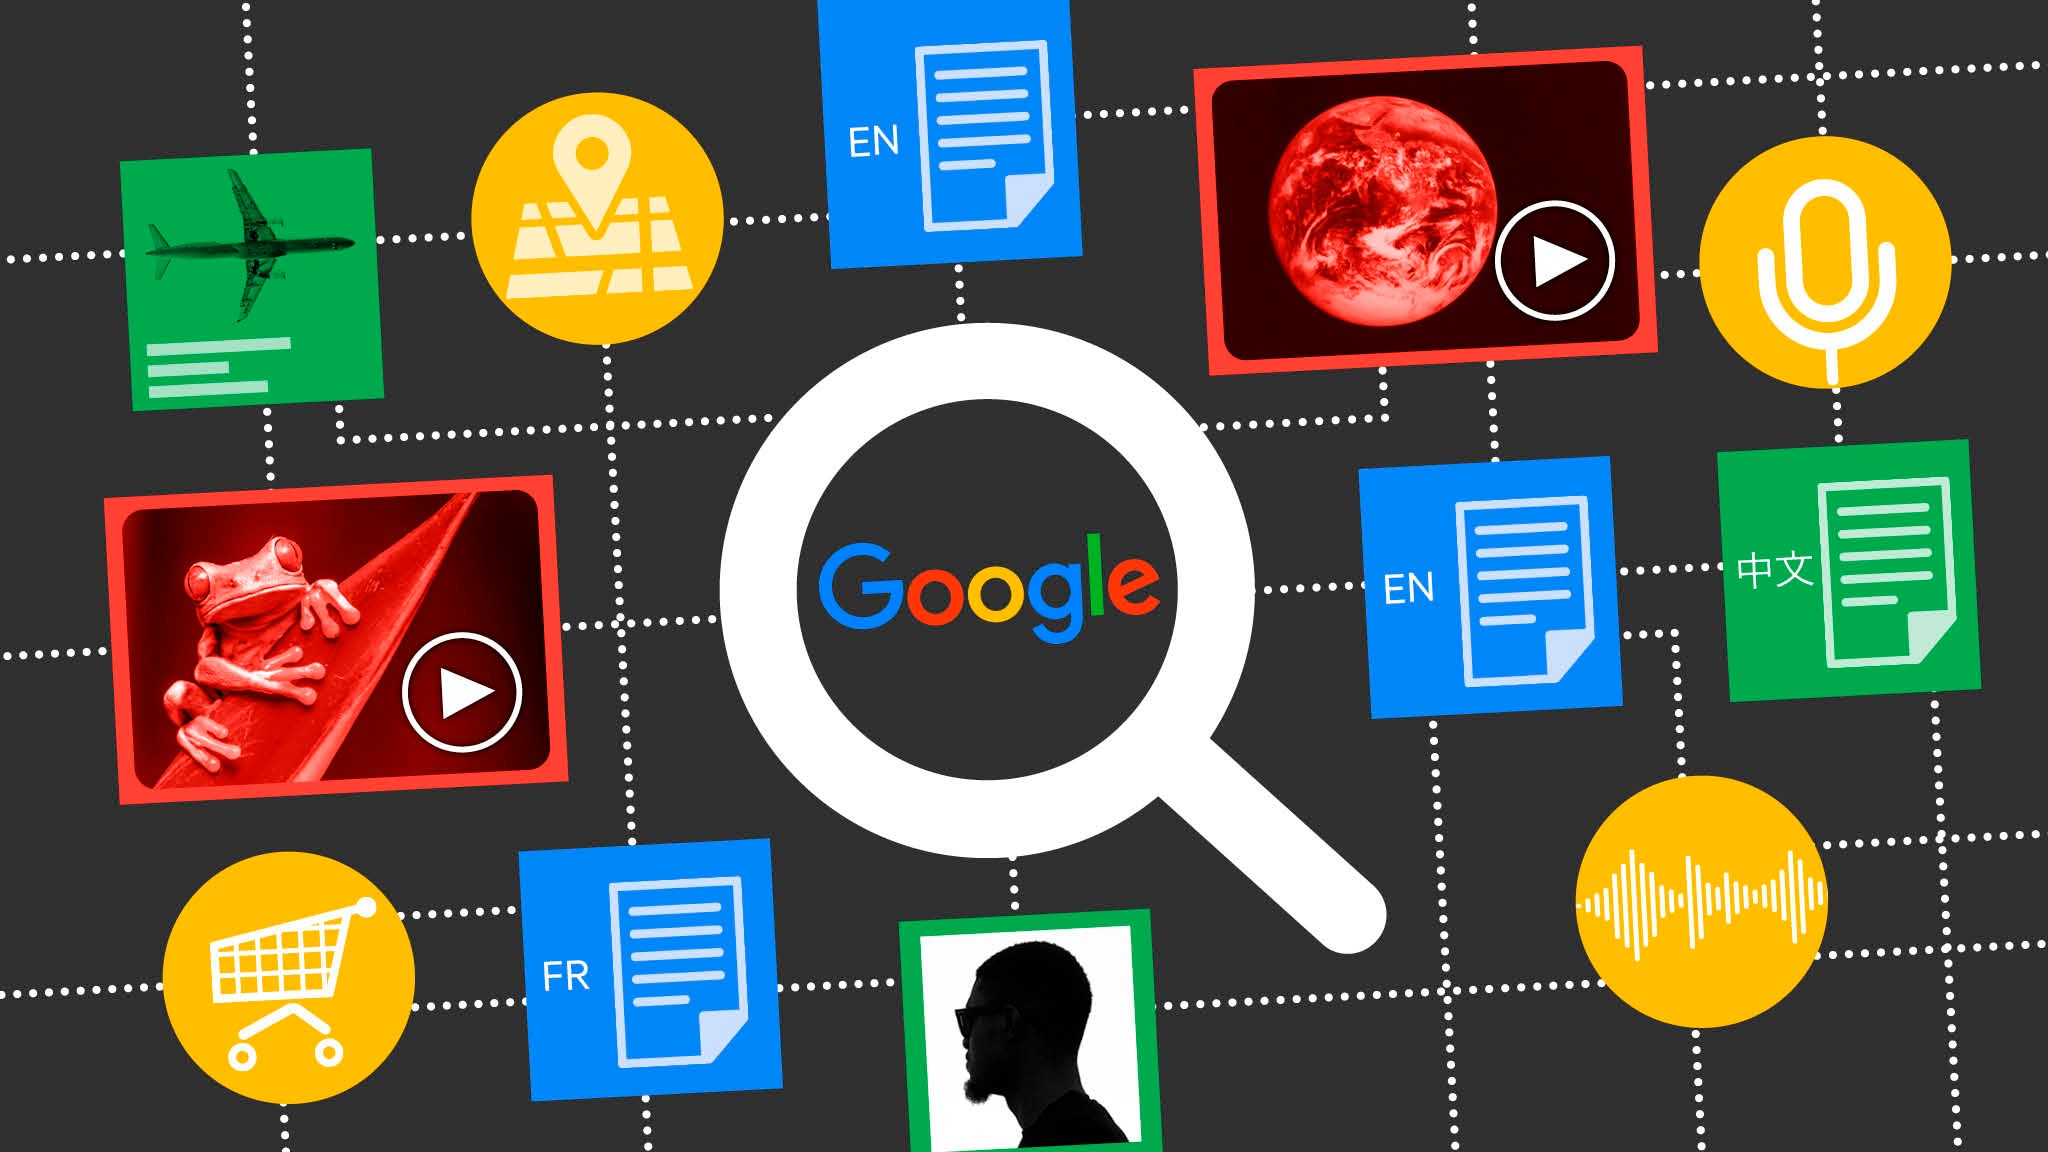 How does Google search engine work?